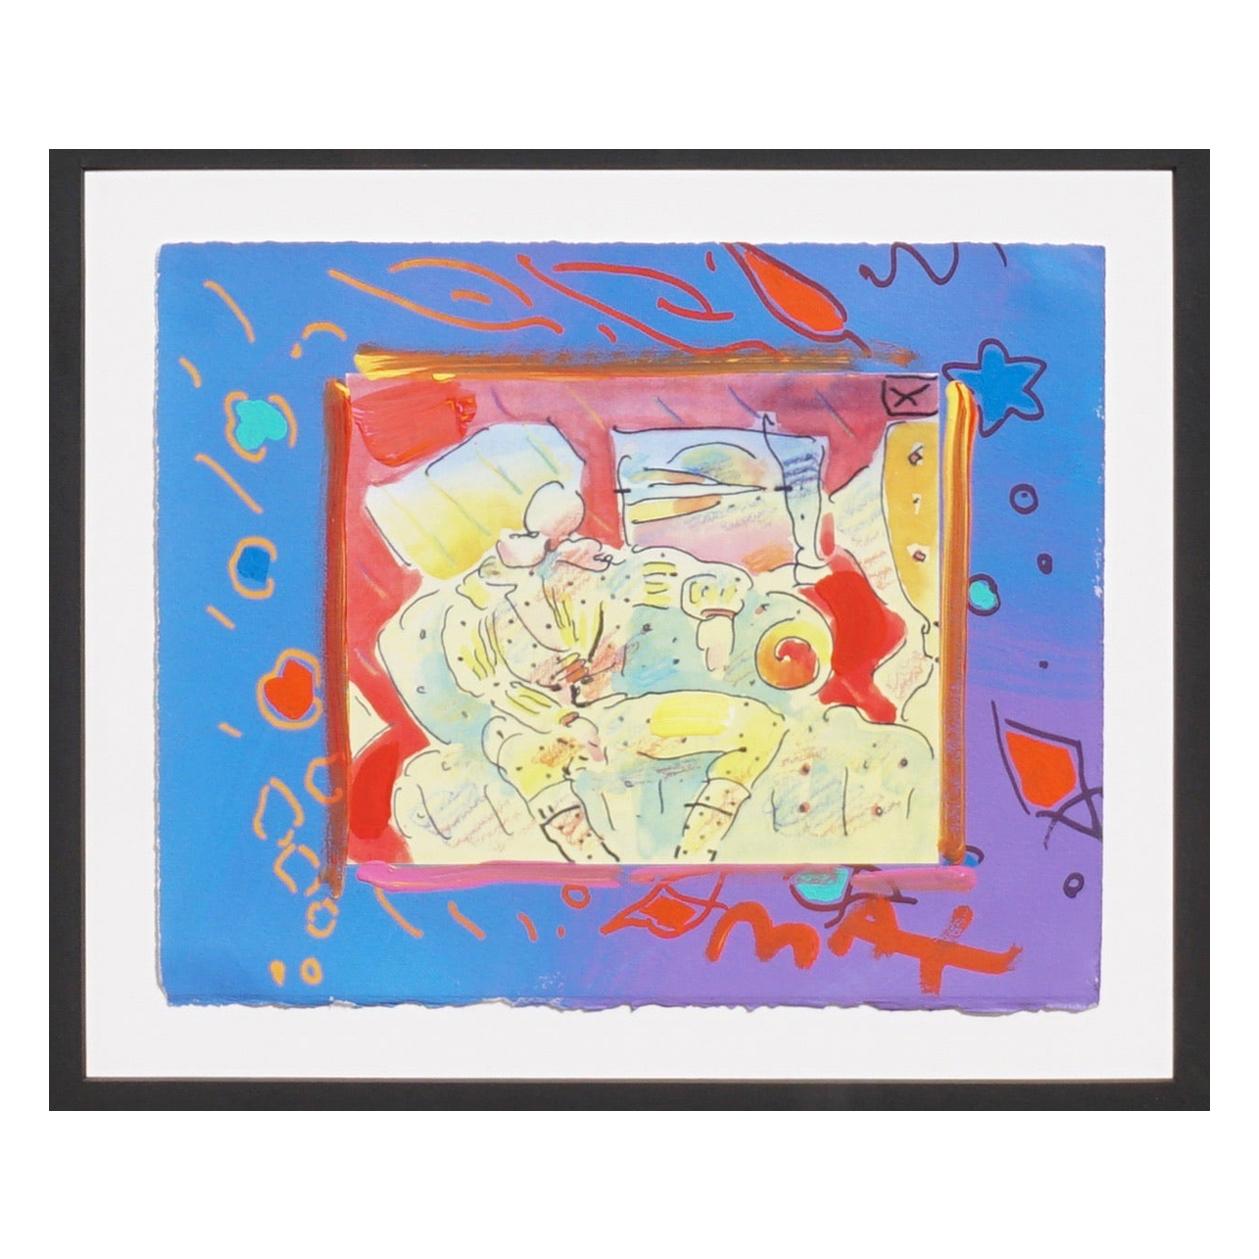 Peter Max Mixed-Media Enamel on Lithograph, 1996